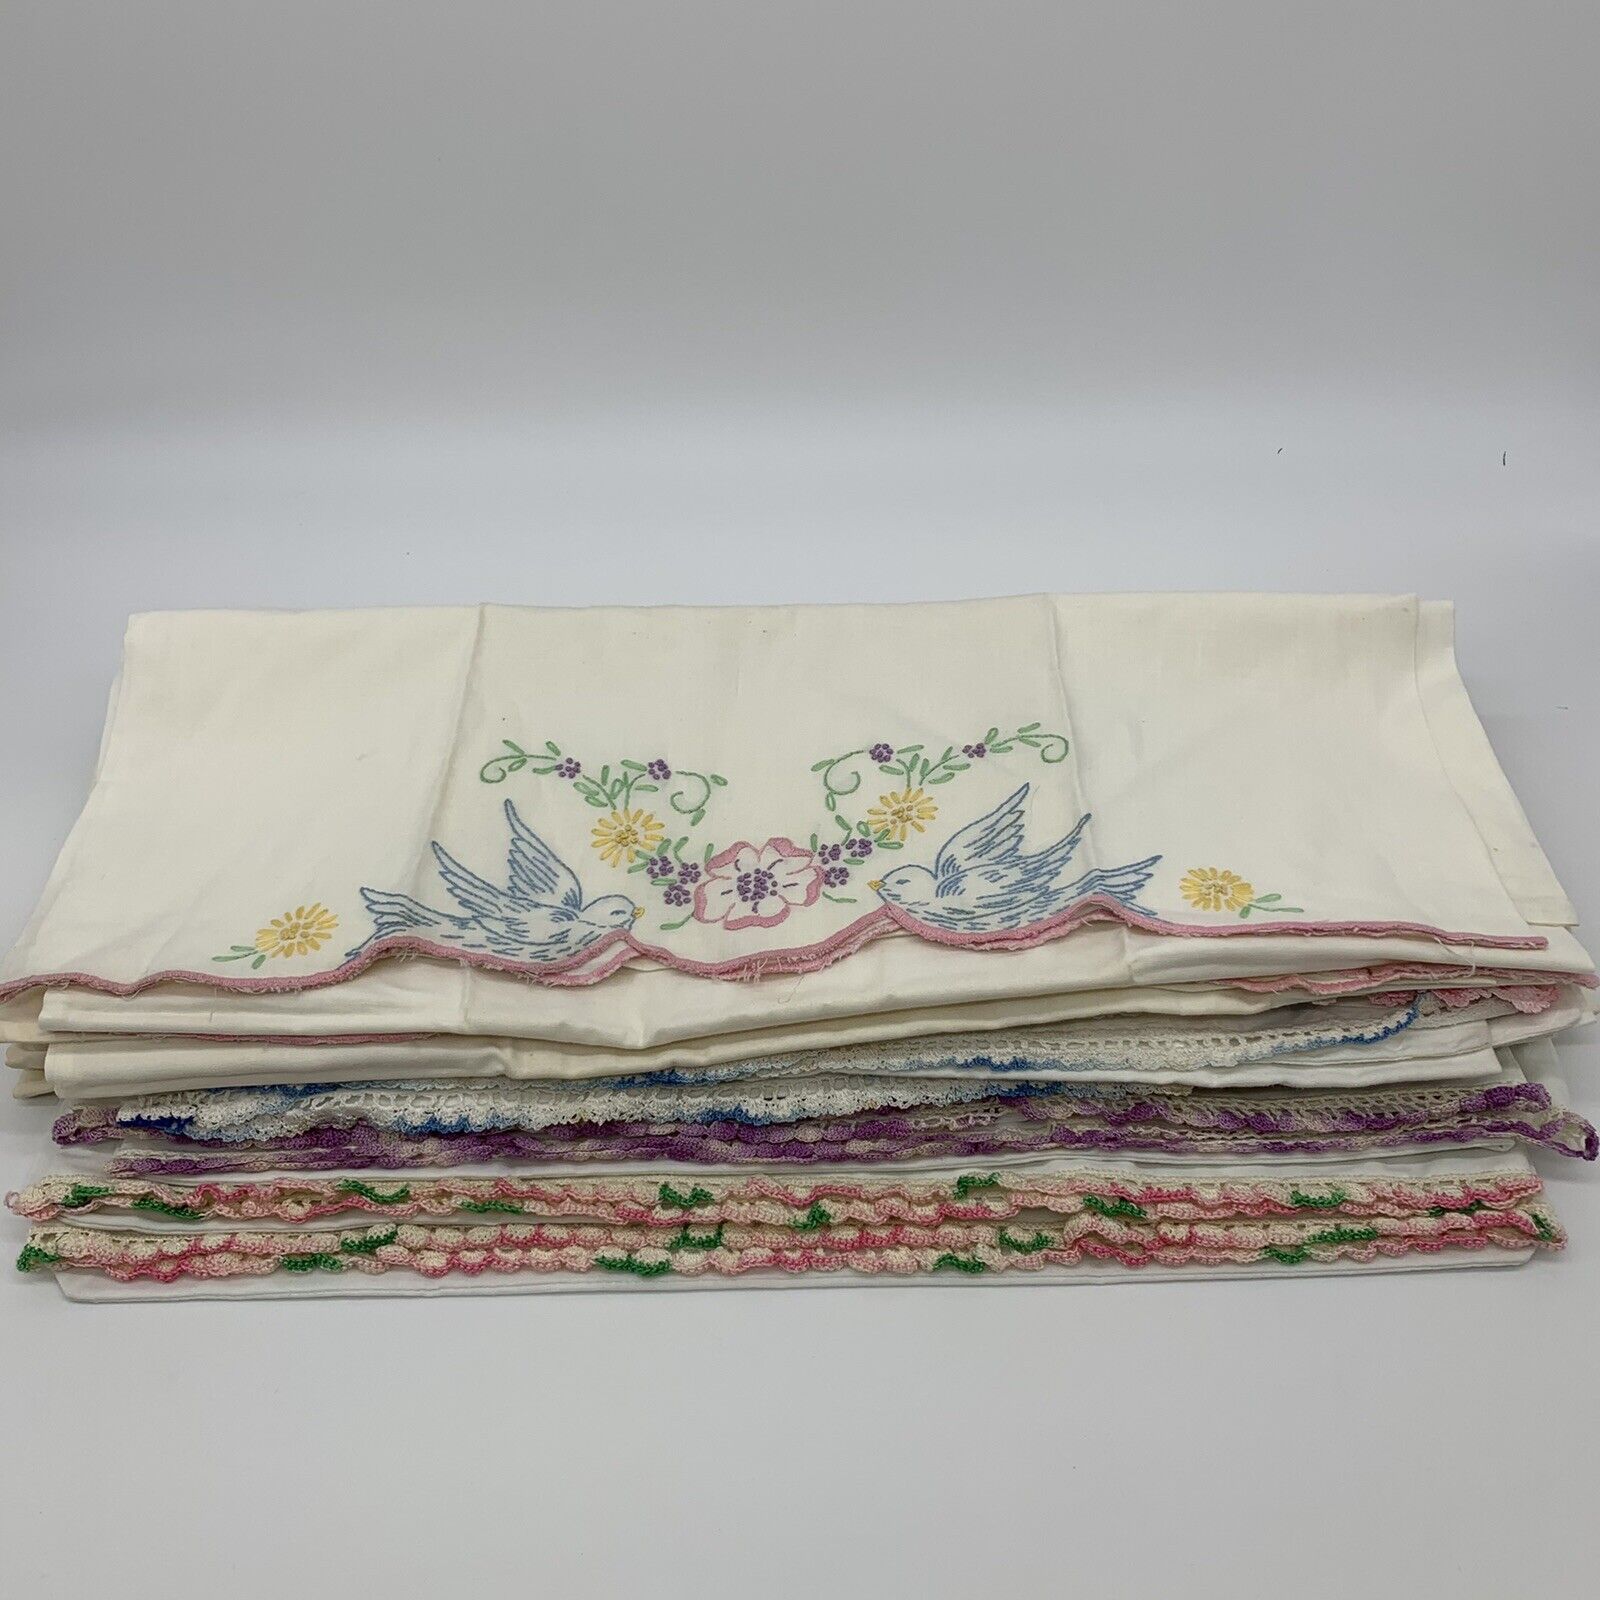 VTG 1970s Hand Embroidered Floral & Bird Themed Pillowcases - 7 sets, 14 total